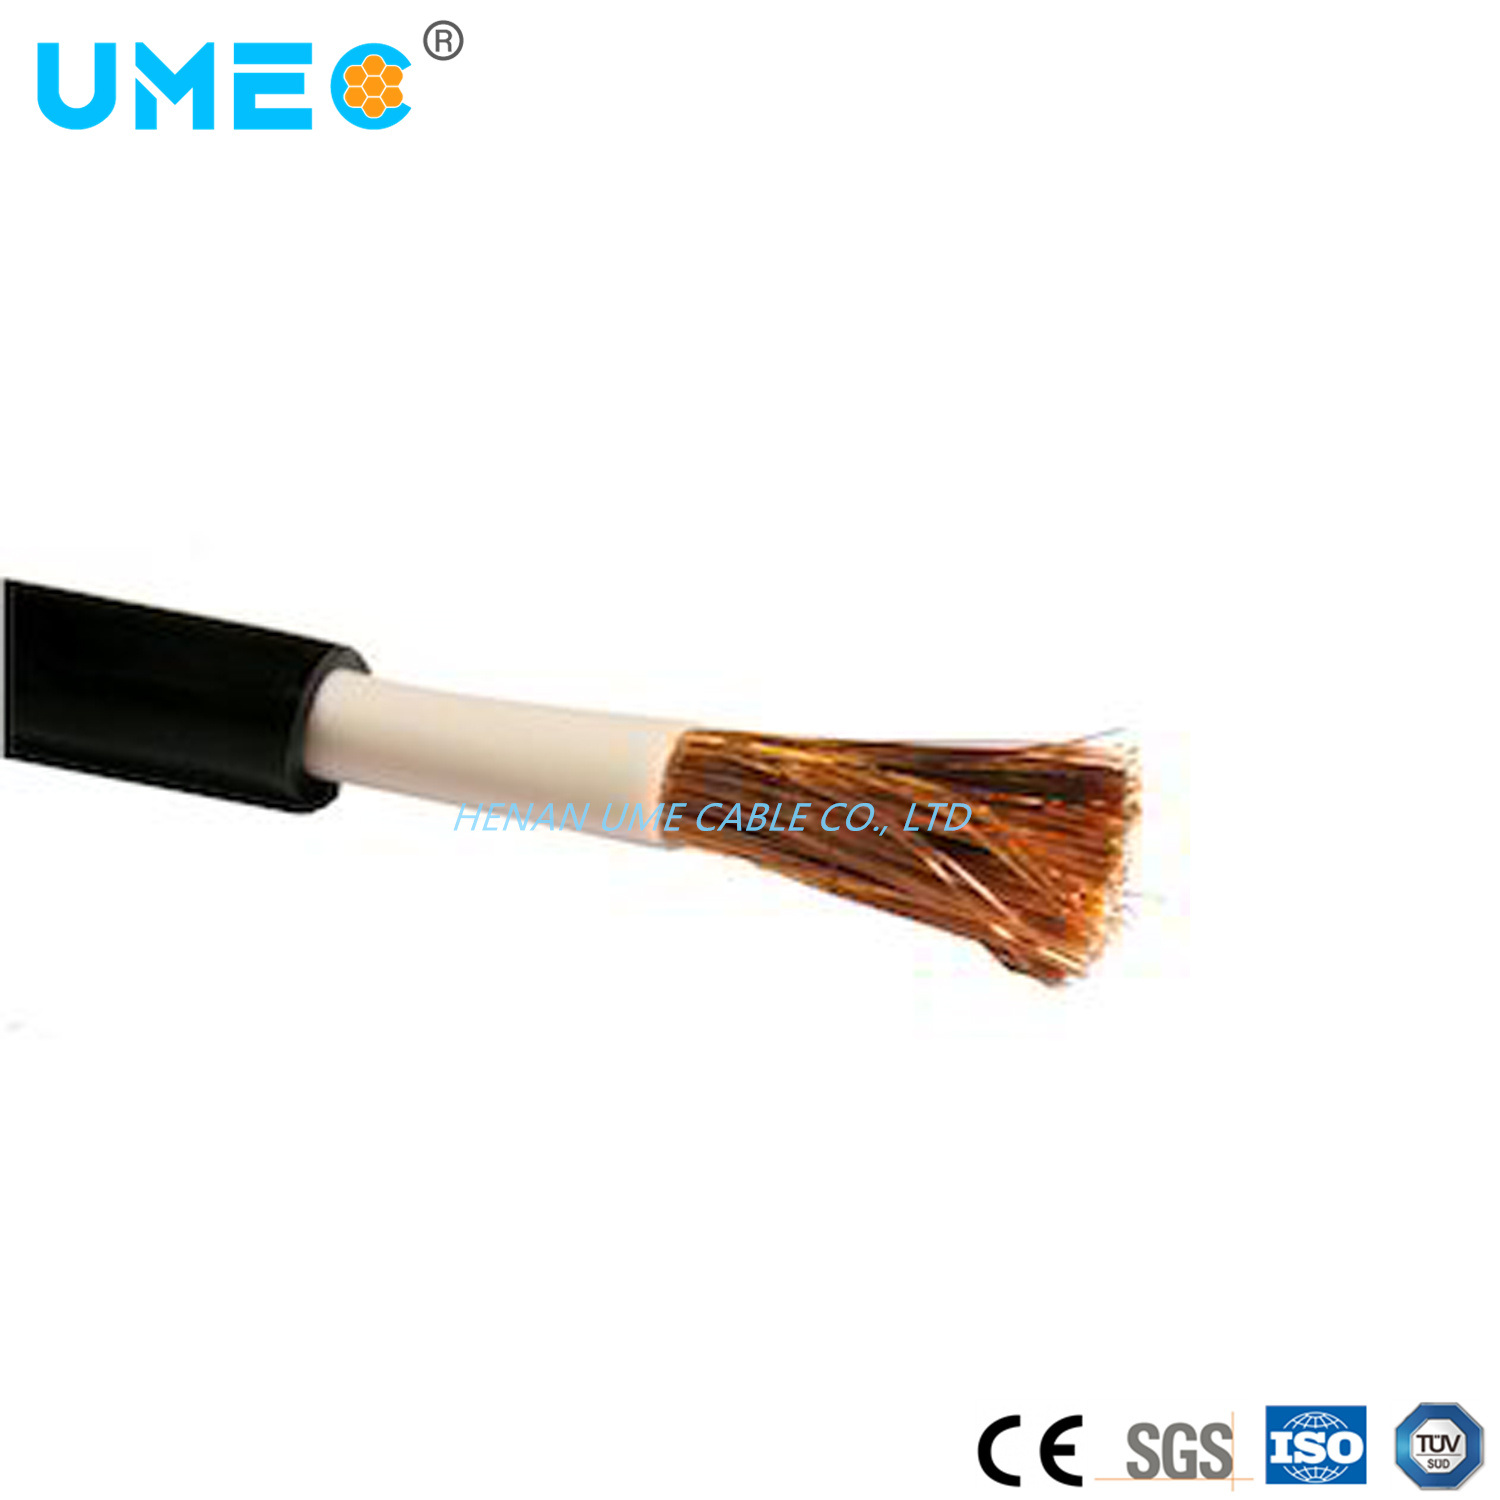 Neoprene Rubber or Other Synthetic Sheath Welding Cable